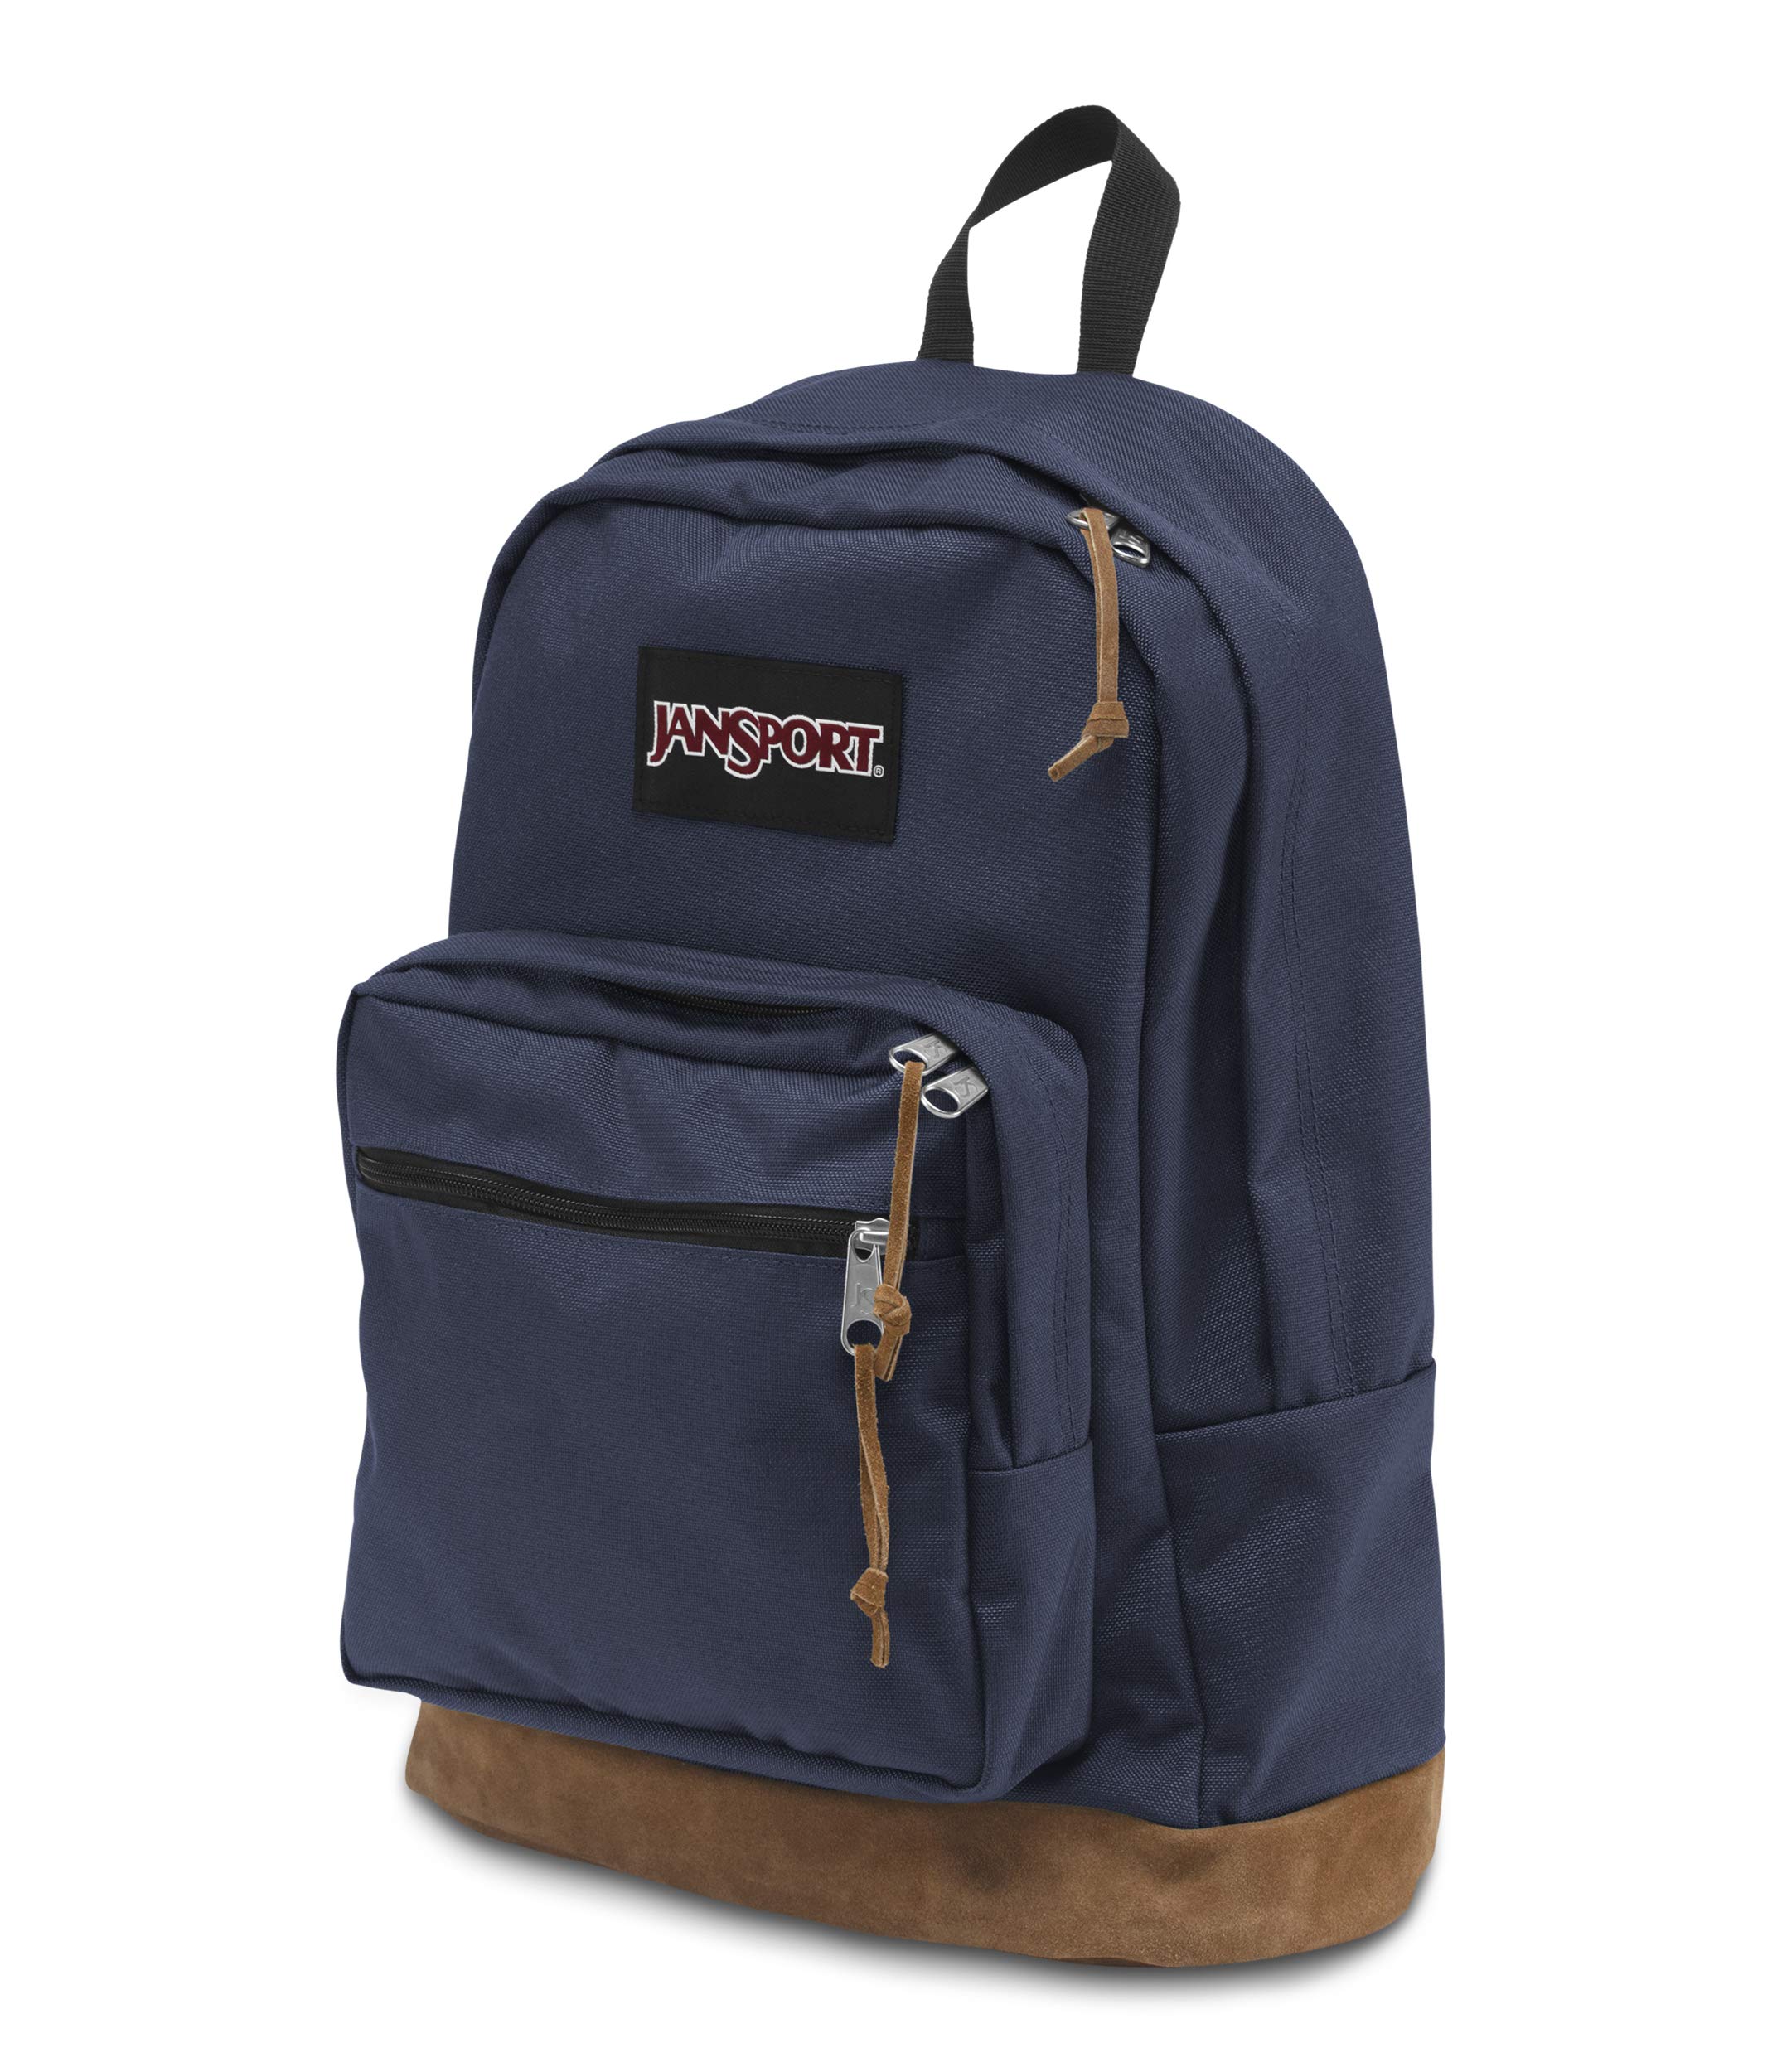 JanSport Right Pack Backpack, Navy, One Size